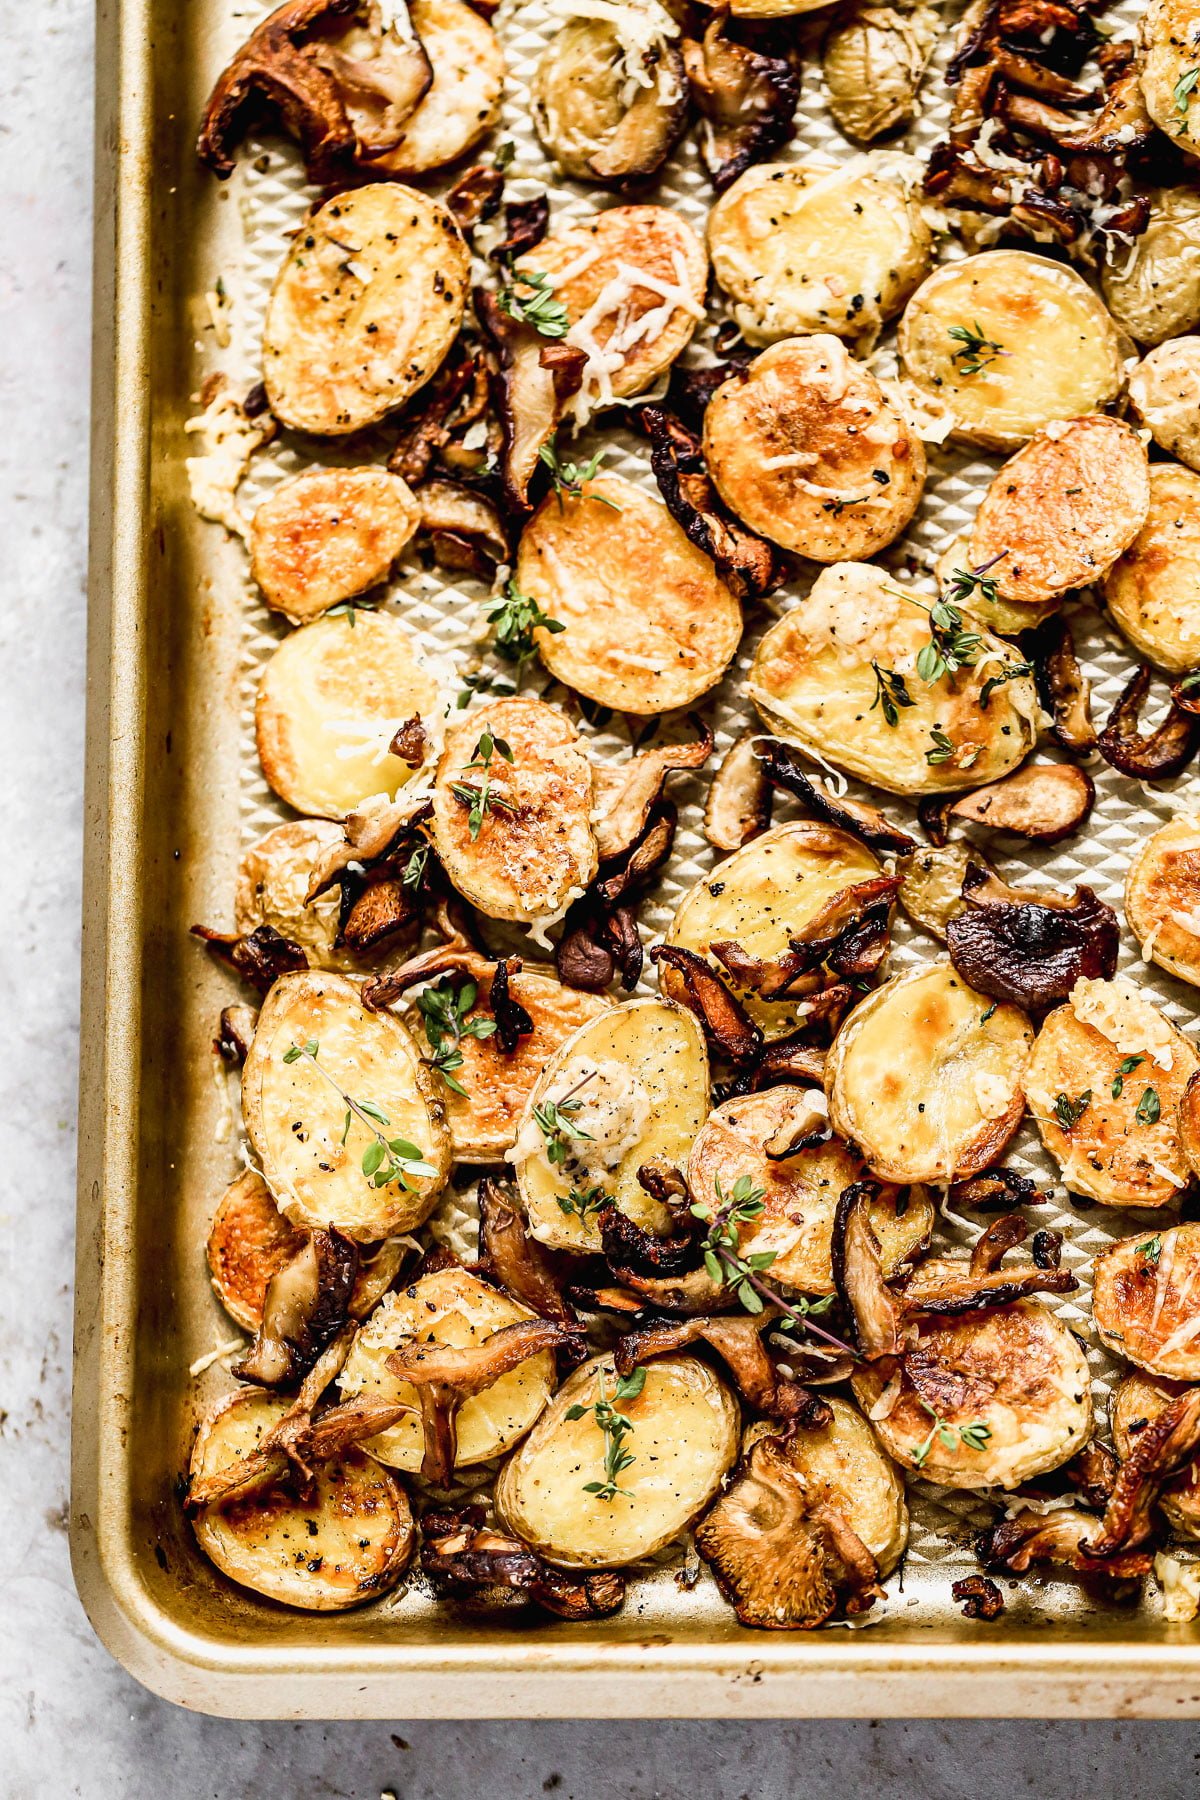 Crispy Parmesan Roasted Potatoes and Mushrooms, always. We roast buttery yukon gold potatoes and woodsy shiitake mushrooms until they're irresistibly crispy and golden, then toss them with nutty parmesan cheese and fresh thyme. Simple, but so delicious. &nbsp;